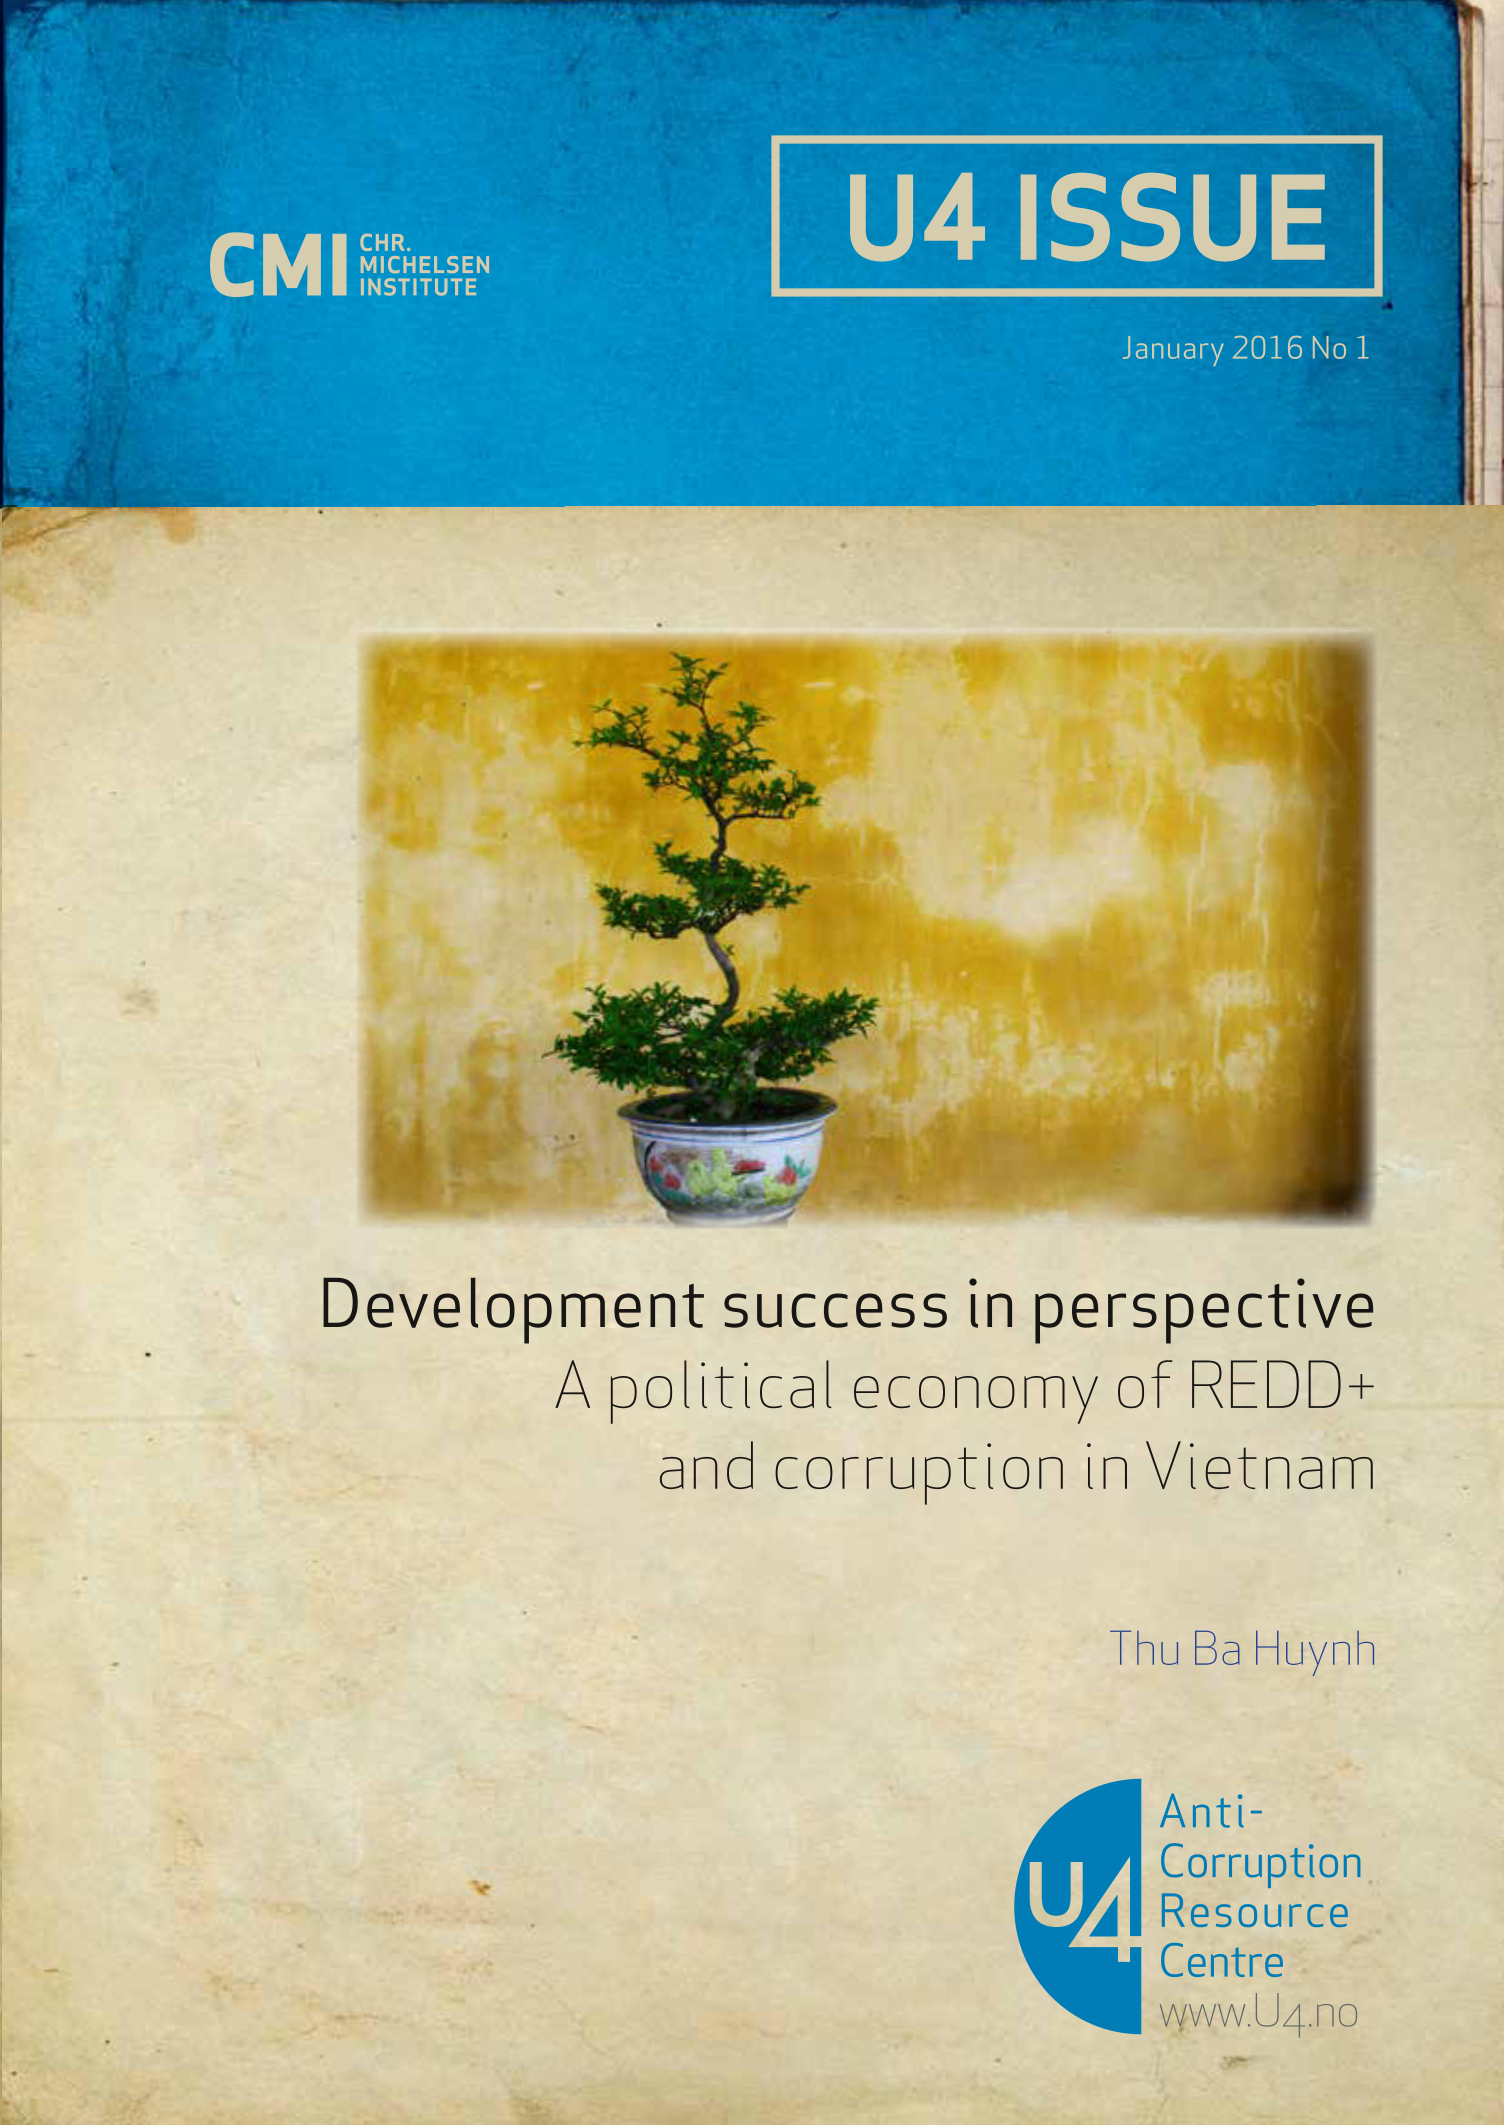 Development success in perspective: A political economy of REDD+ and corruption in Vietnam